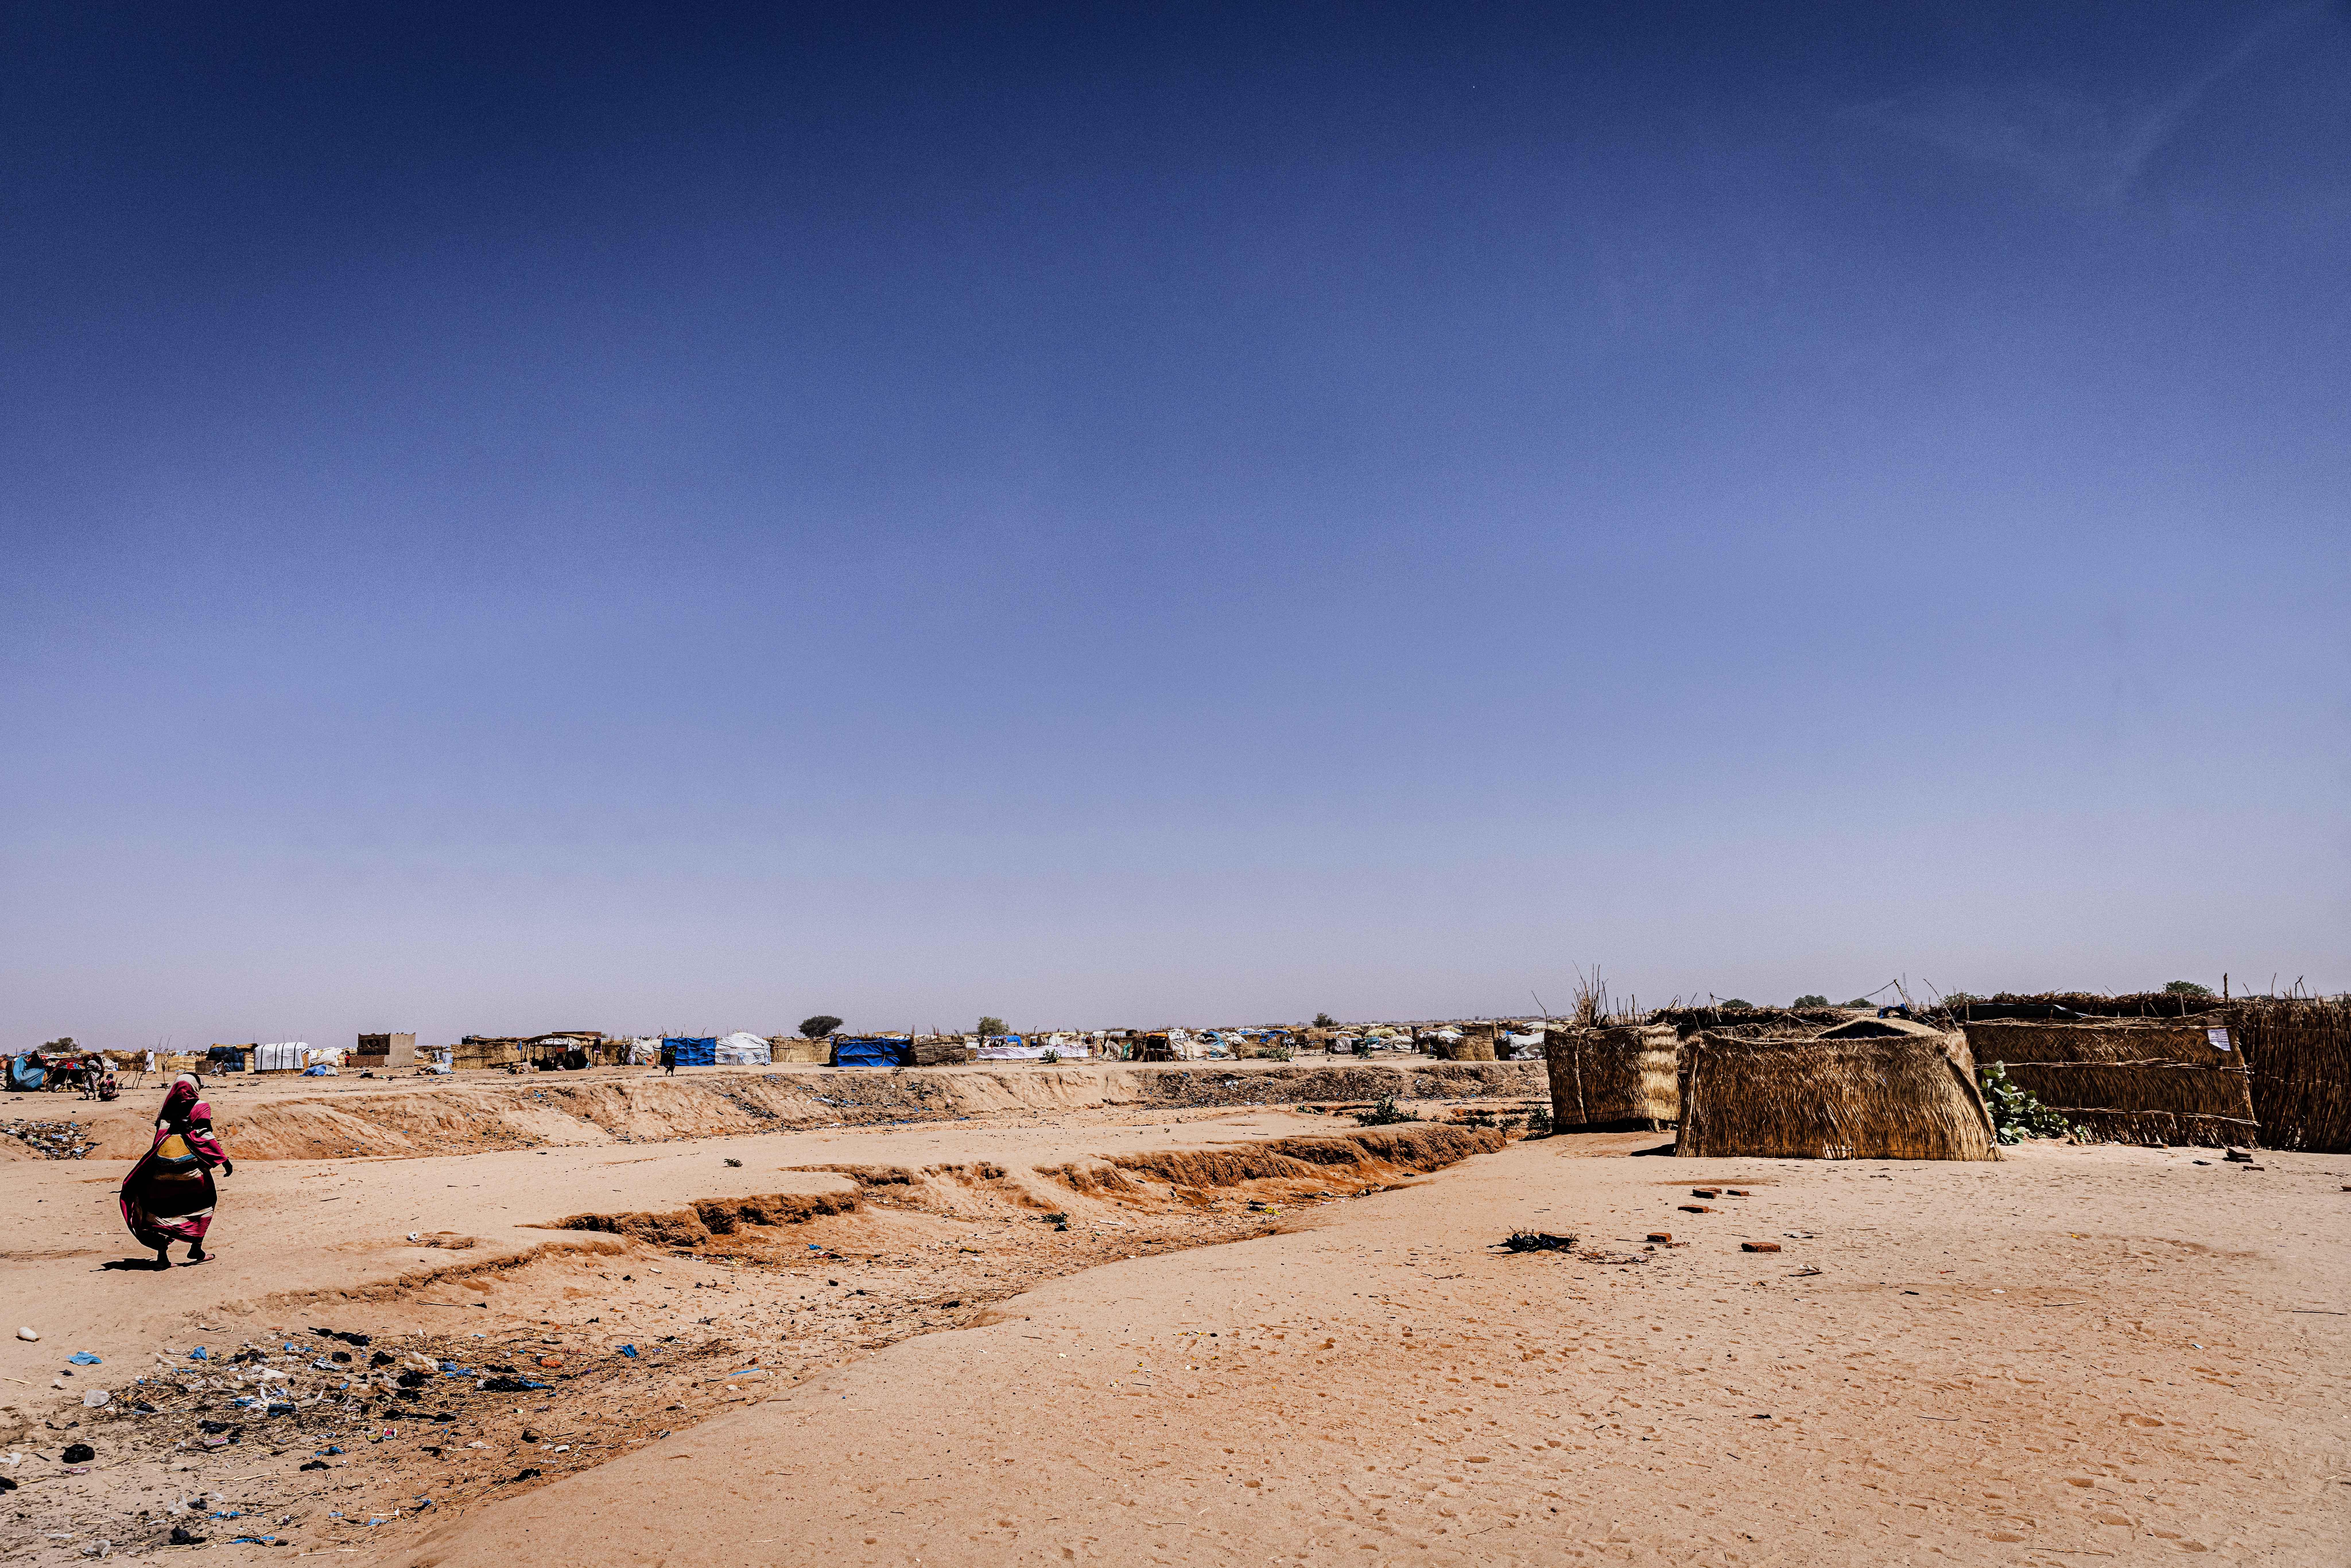 Eastern Chad: Supply Distribution An estimated 120,000 refugees are living in the Adré transit camp in eastern Chad. People are living in undignified conditions, far from any services, relying mostly on humanitarian aid that is far from adequate.